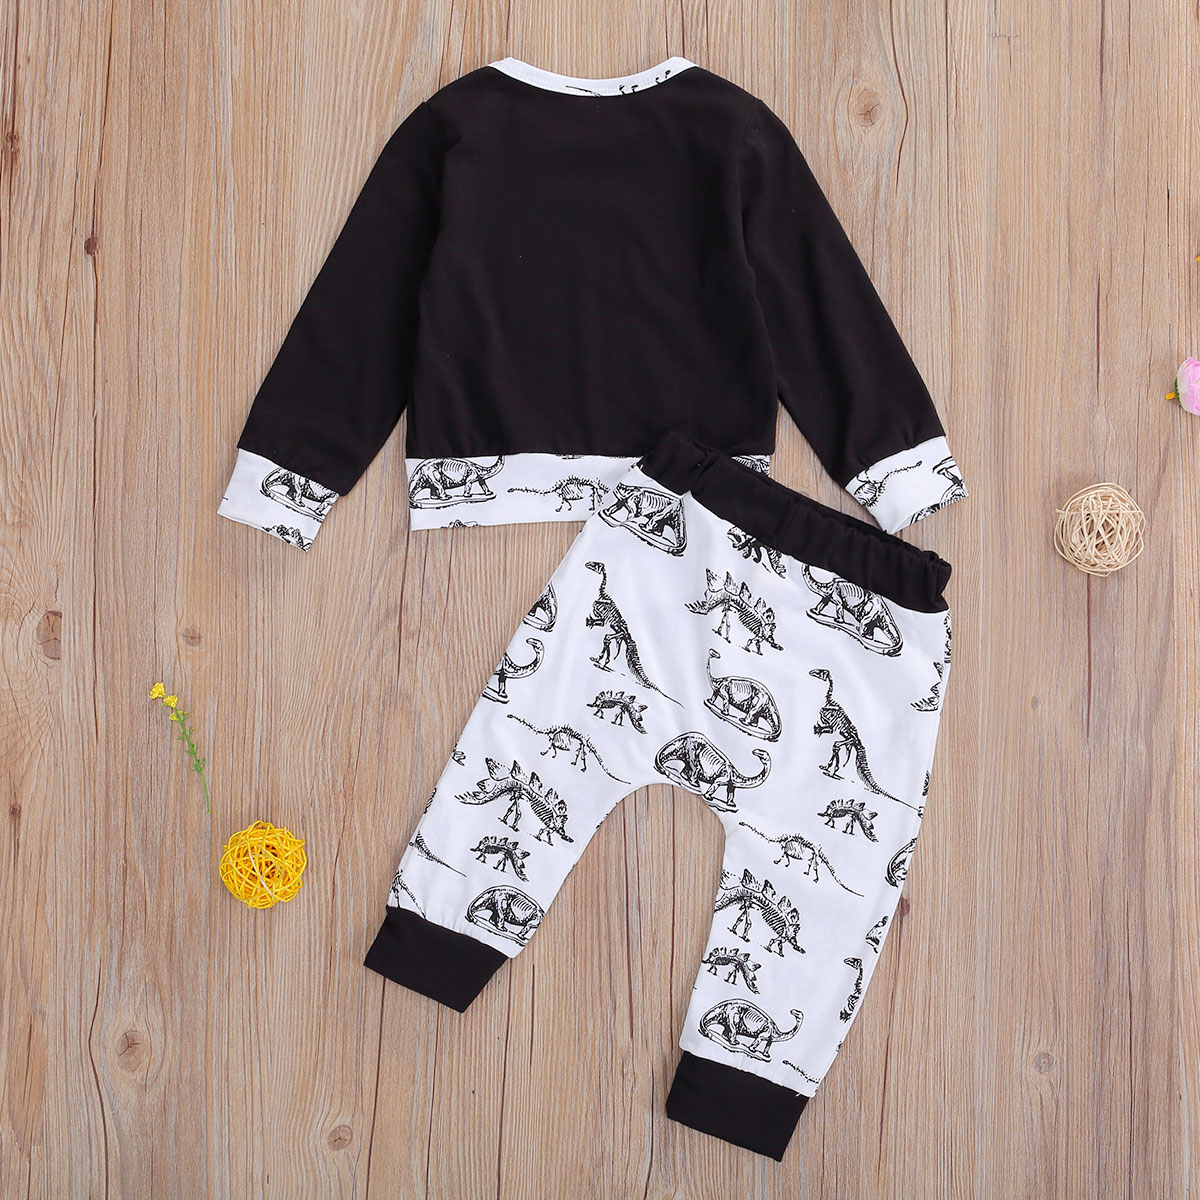 Baby Boys Matching Outfits Autumn Big Little Brother Clothes Sets Dinosaur Print Long Sleeve Pullover Tops Pants 2pcs Outfits